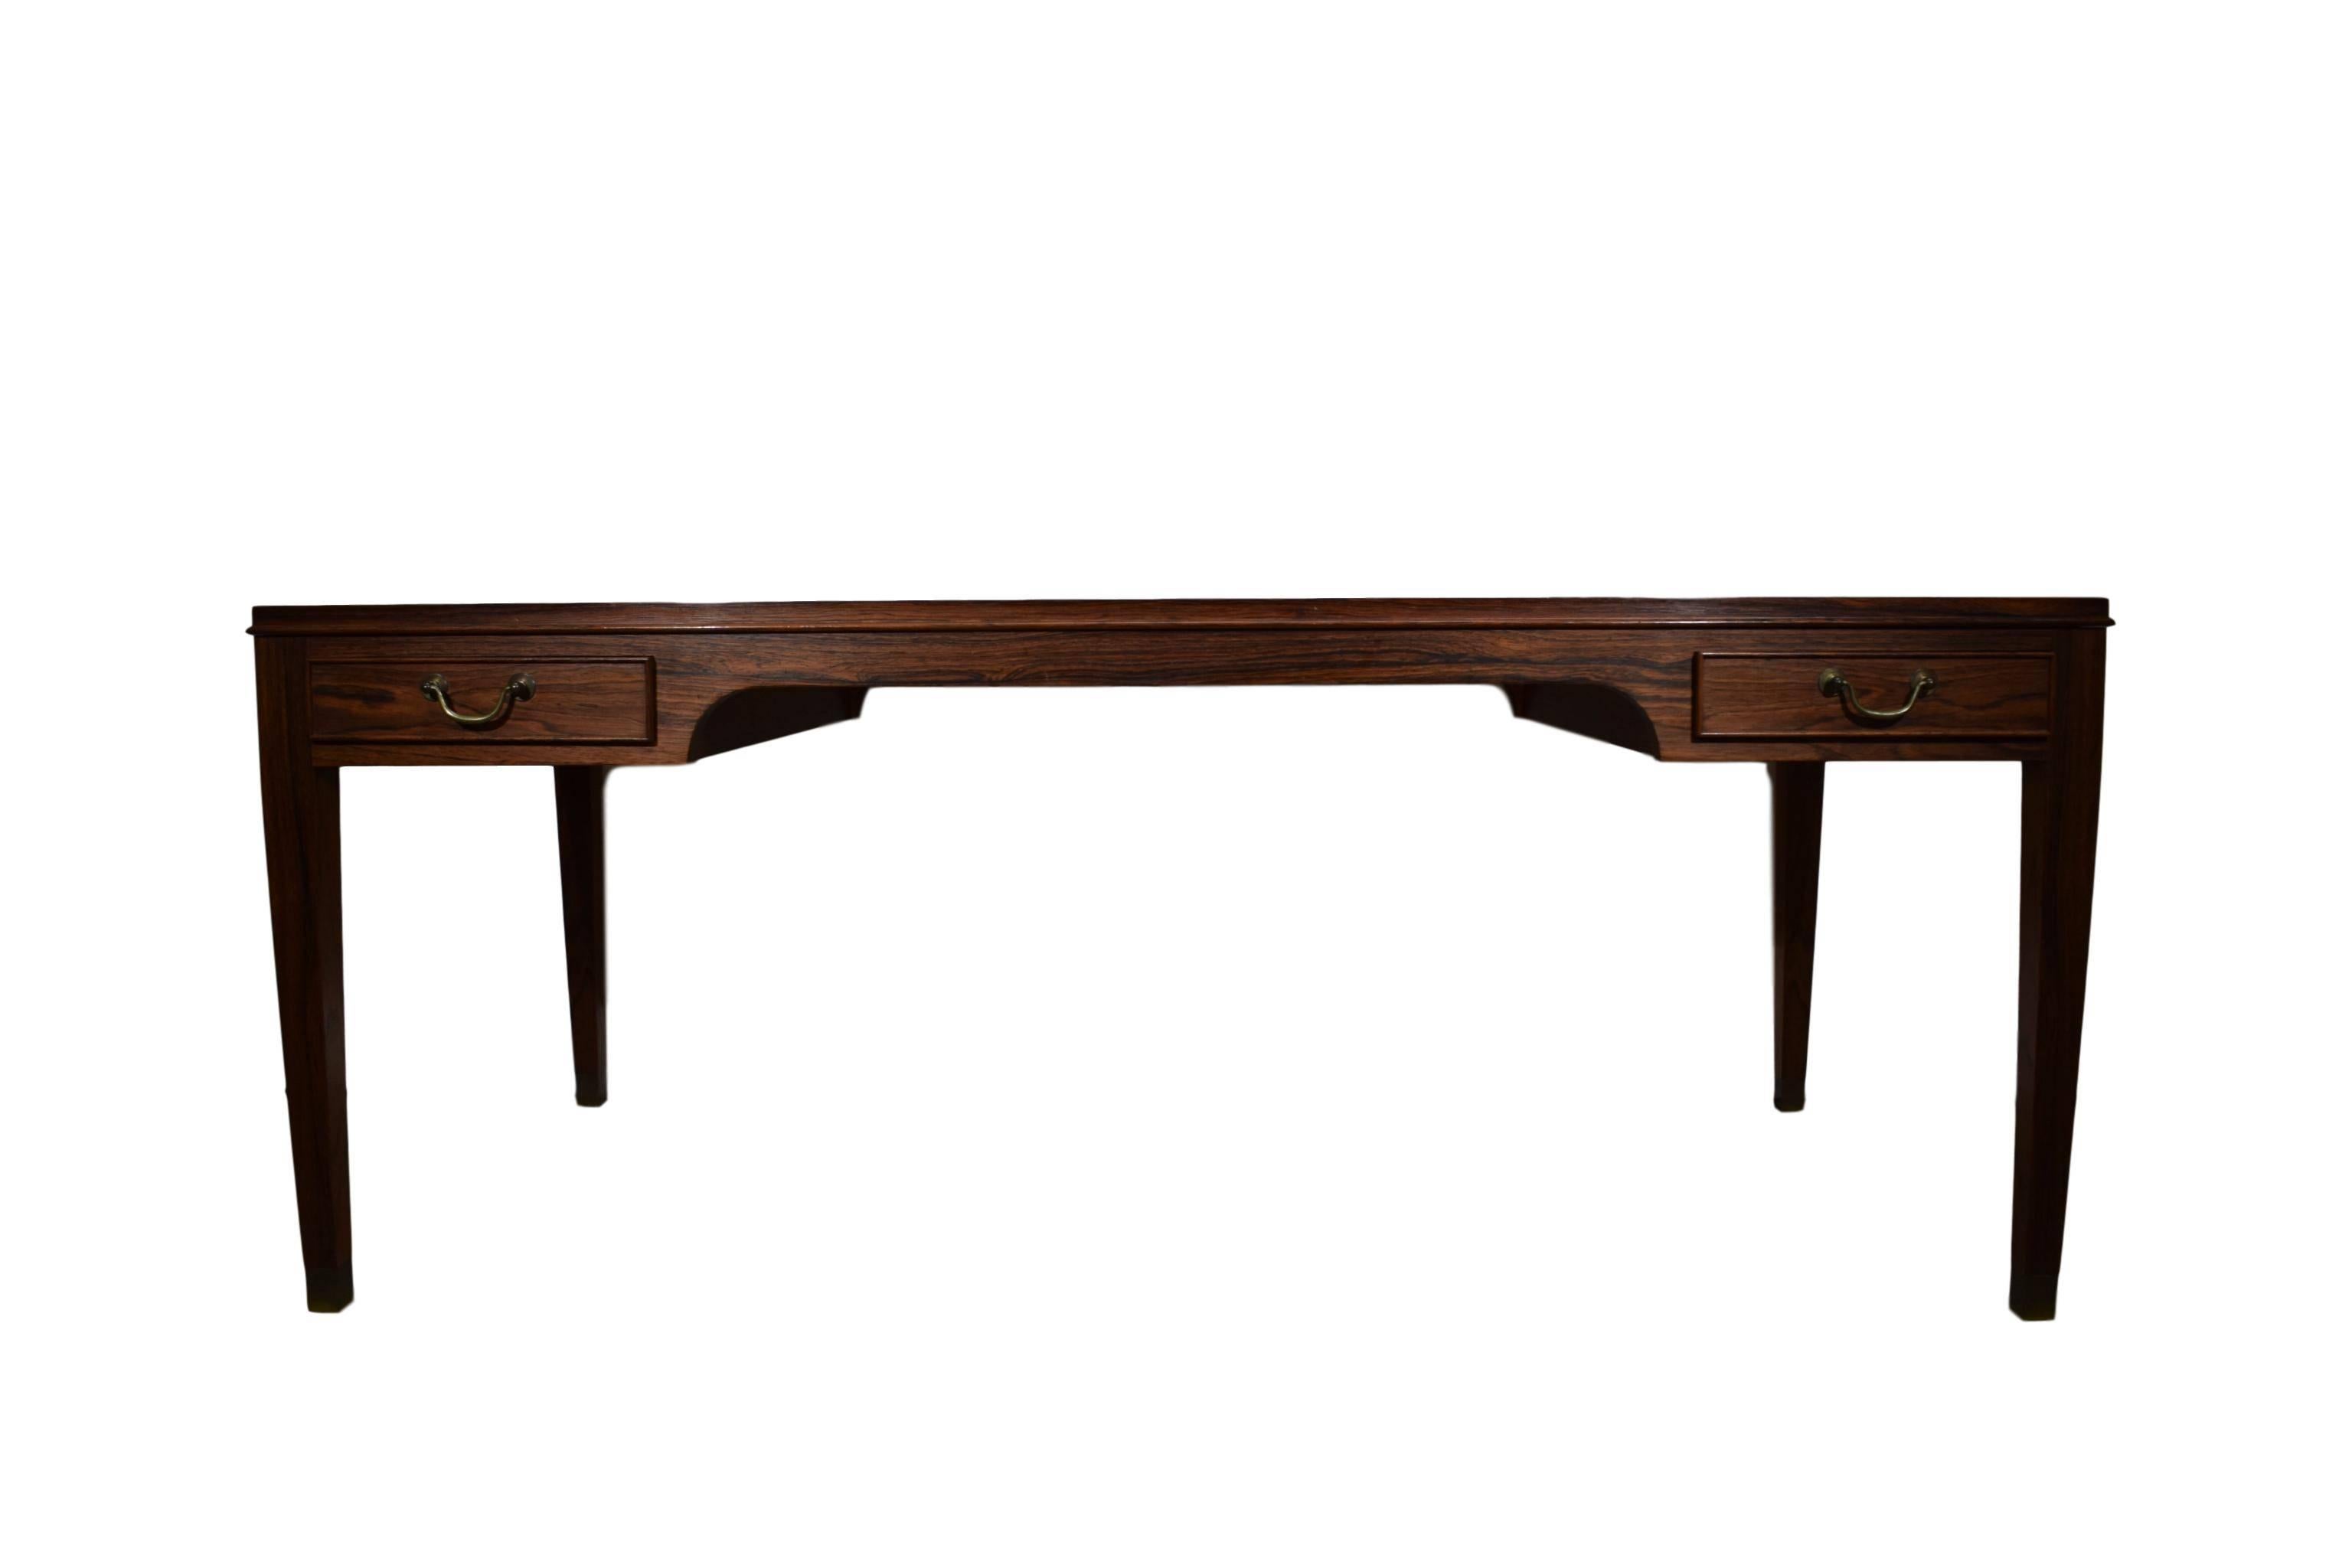 A Danish midcentury rosewood coffee table by Frits Henningsen. Rosewood veneer and solid rosewood legs. Four drawers with brass handles. Tapered legs with brass shoes.

 